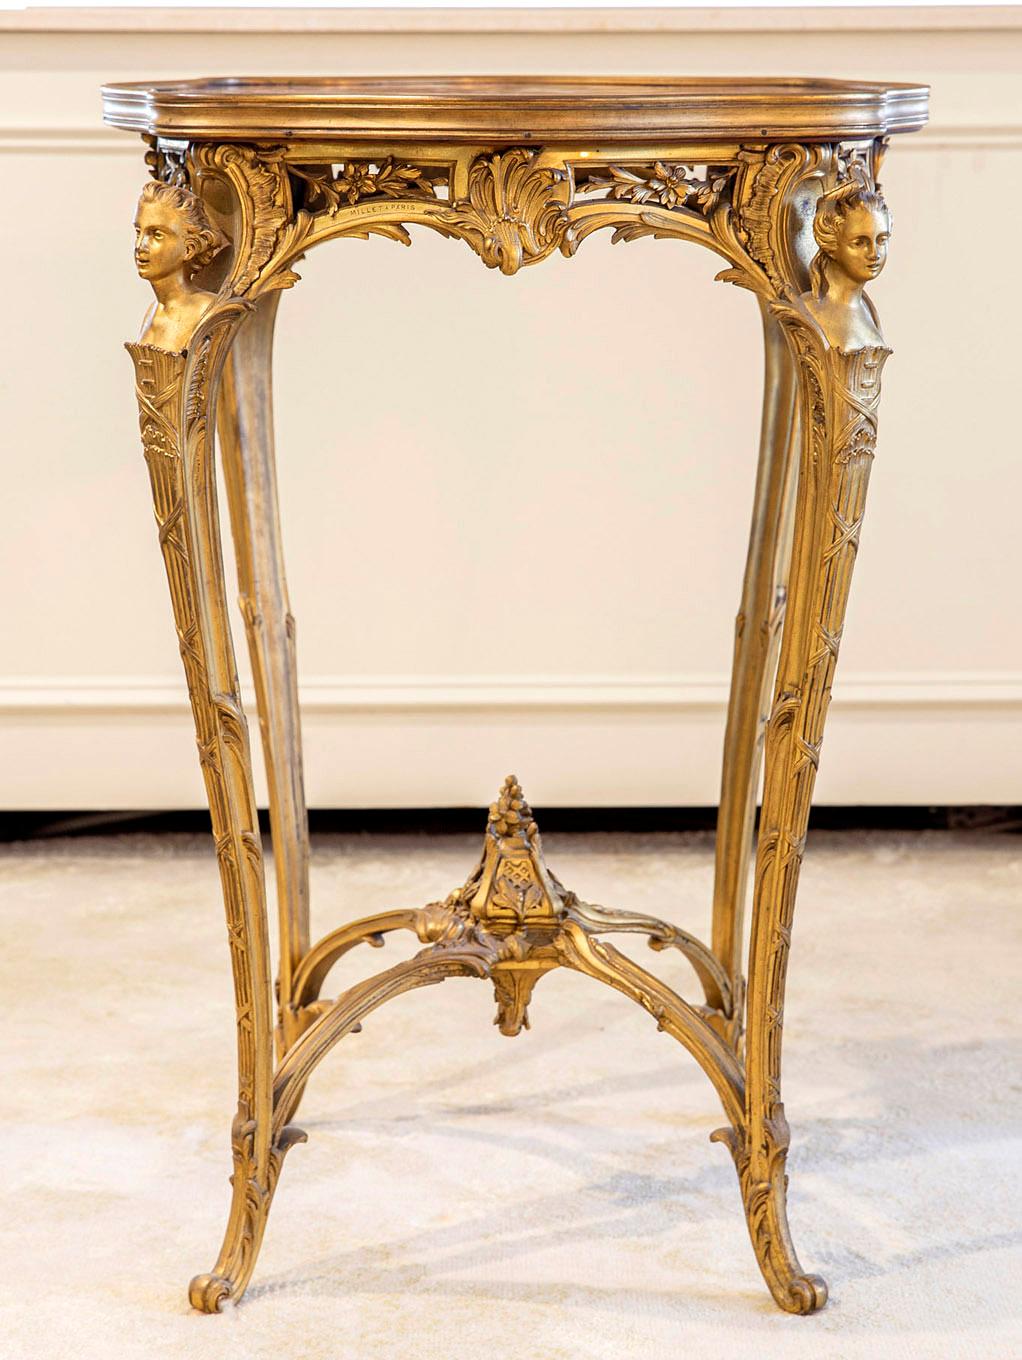 A Special Late 19th Century Louis XV Style Gilt Bronze Marble Top Side Table By Maison Millet

Maison Millet

The shaped breche violette marble top above the pierced bronze floral frieze, the angles headed by very fine male and female espagnolettes